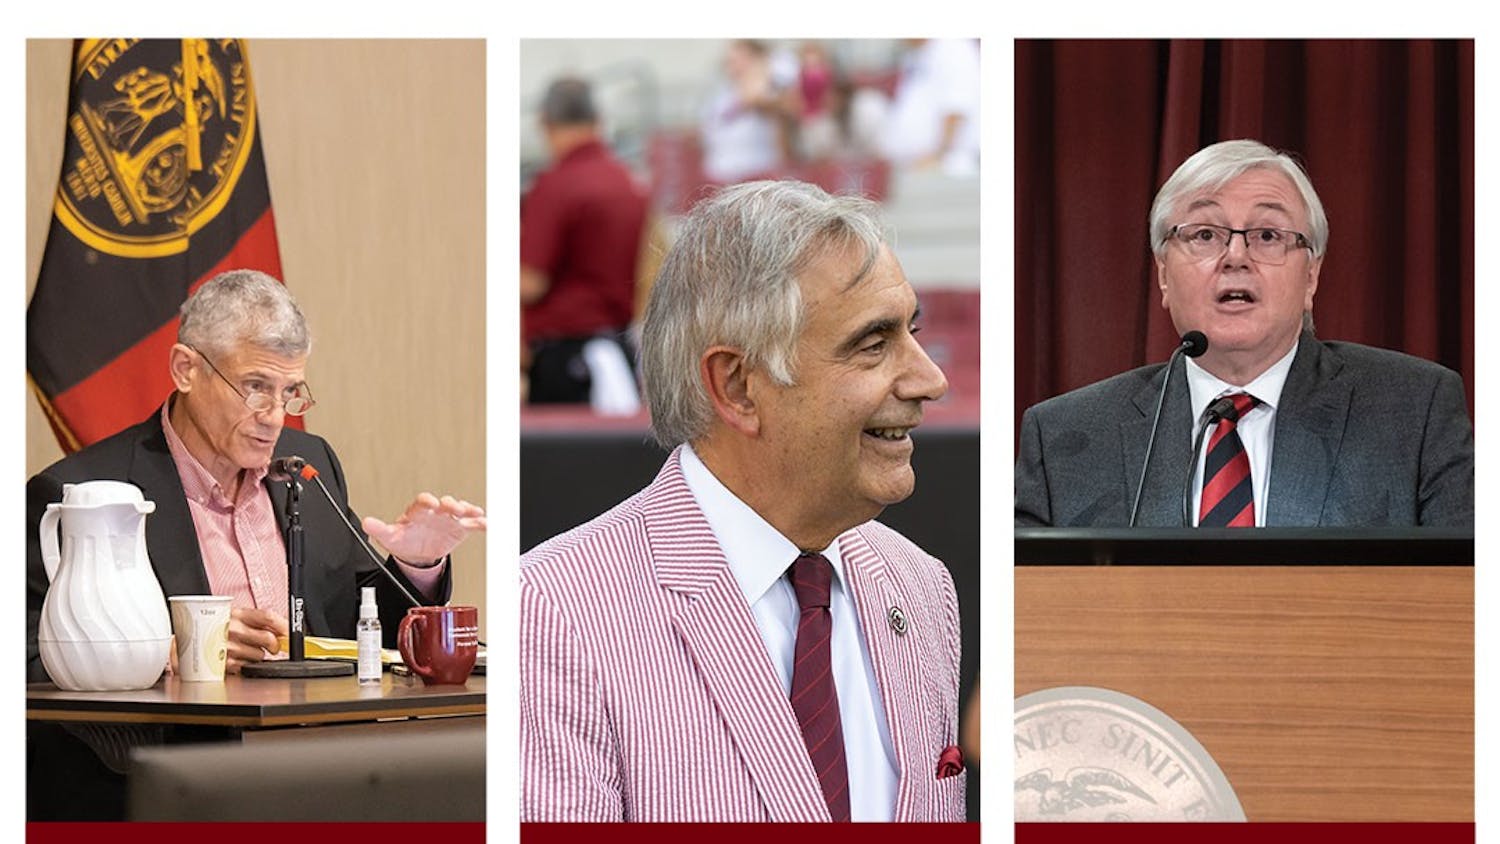 Former university President Bob Caslen, interim university President Harris Pastides, and university President-Elect Michael Amiridis. Caslen served from July 2019 to May 2021, Pastides from May 2021 to the Summer of 2022, and Amiridis will start during the summer of 2022.